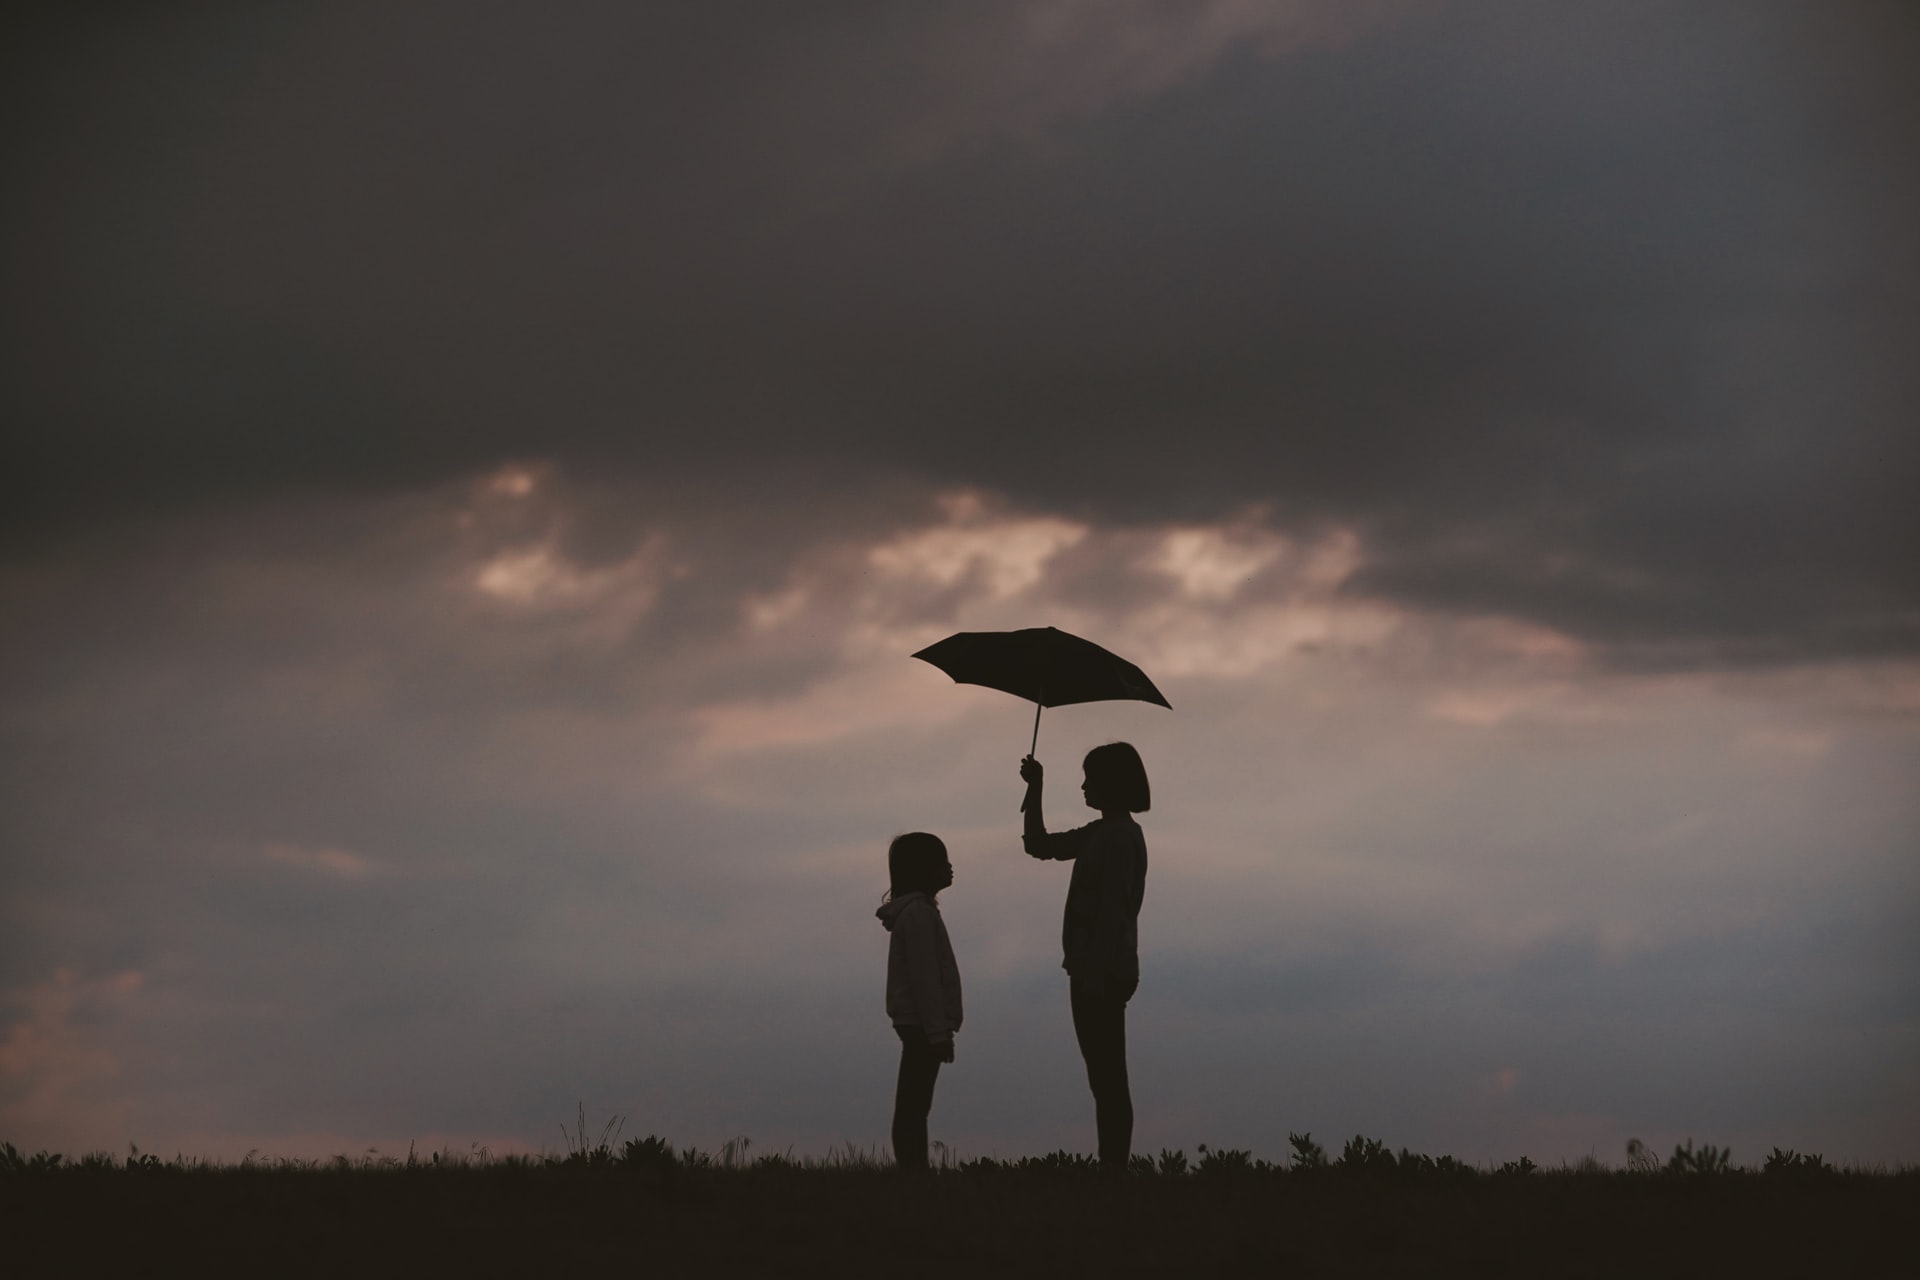 Photo of an taller person protecting a shorter person against the rain with an umbrella. The figures are silhouetted against a grey backdrop.